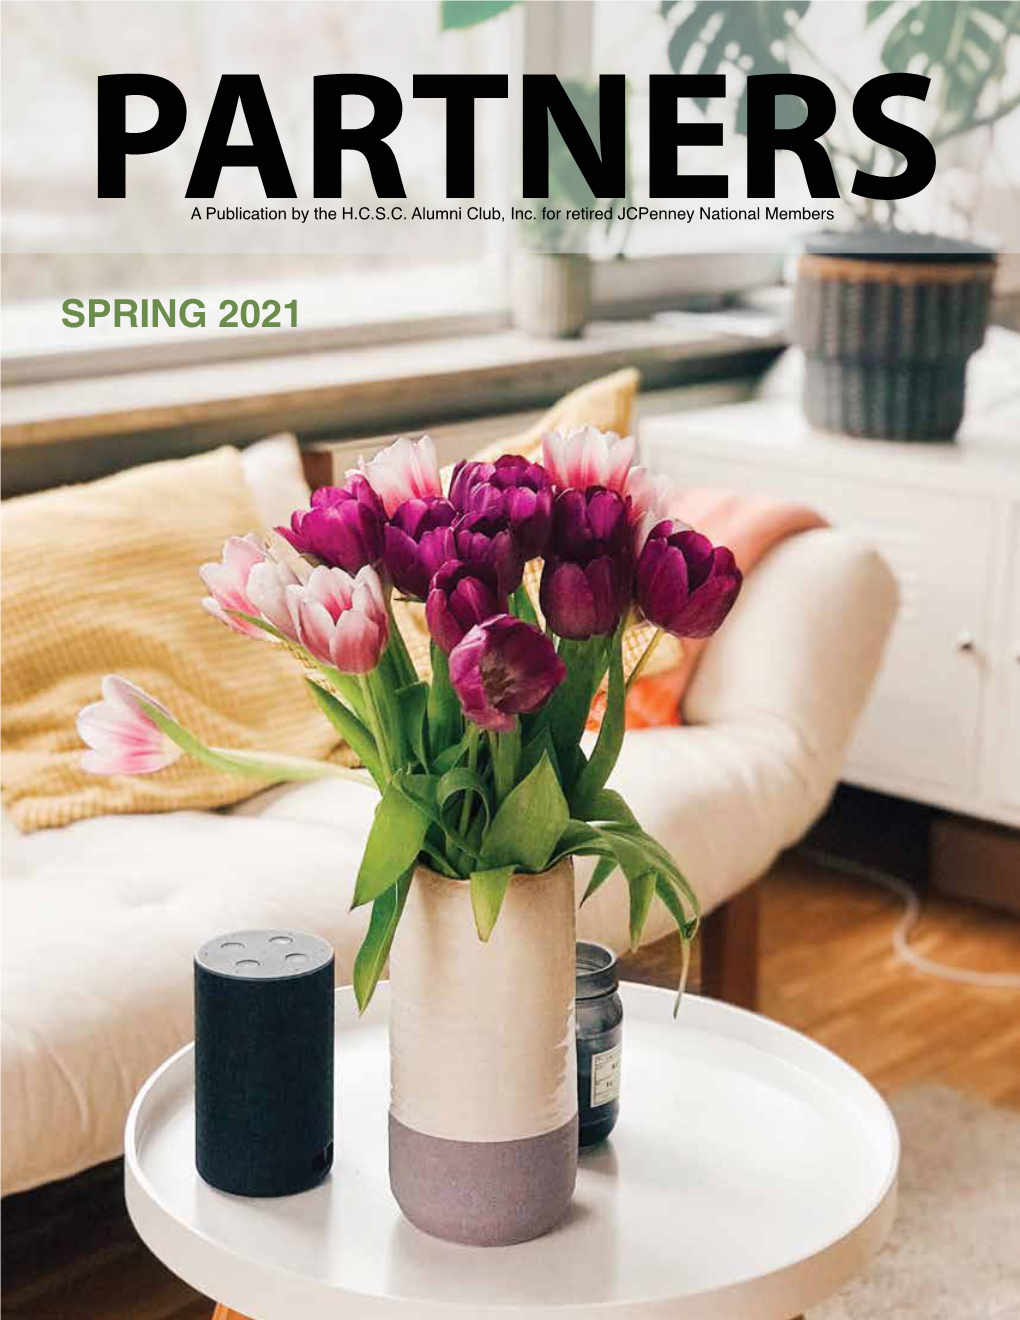 SPRING 2021 Editor’S Note